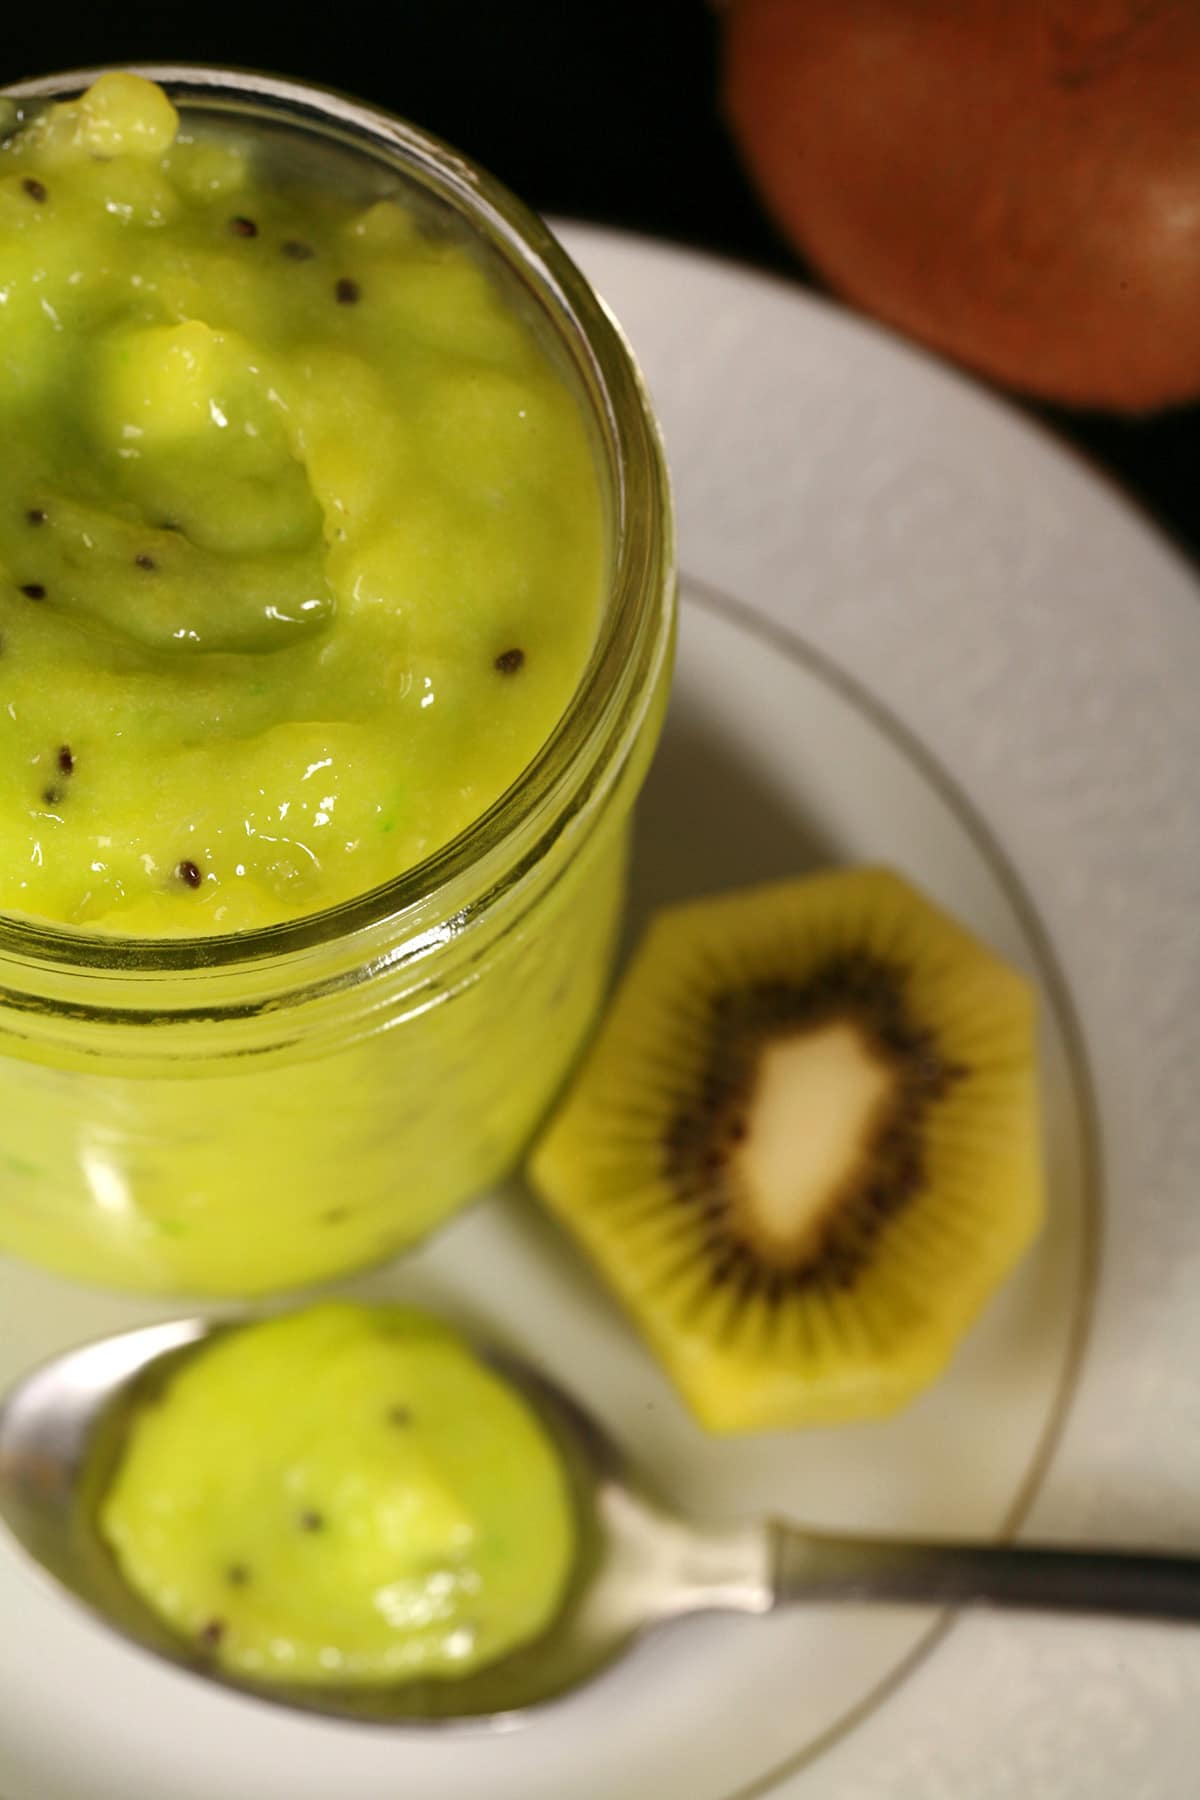 A jar of kiwi curd on a plate. There is a spoon of curd next to the jar.